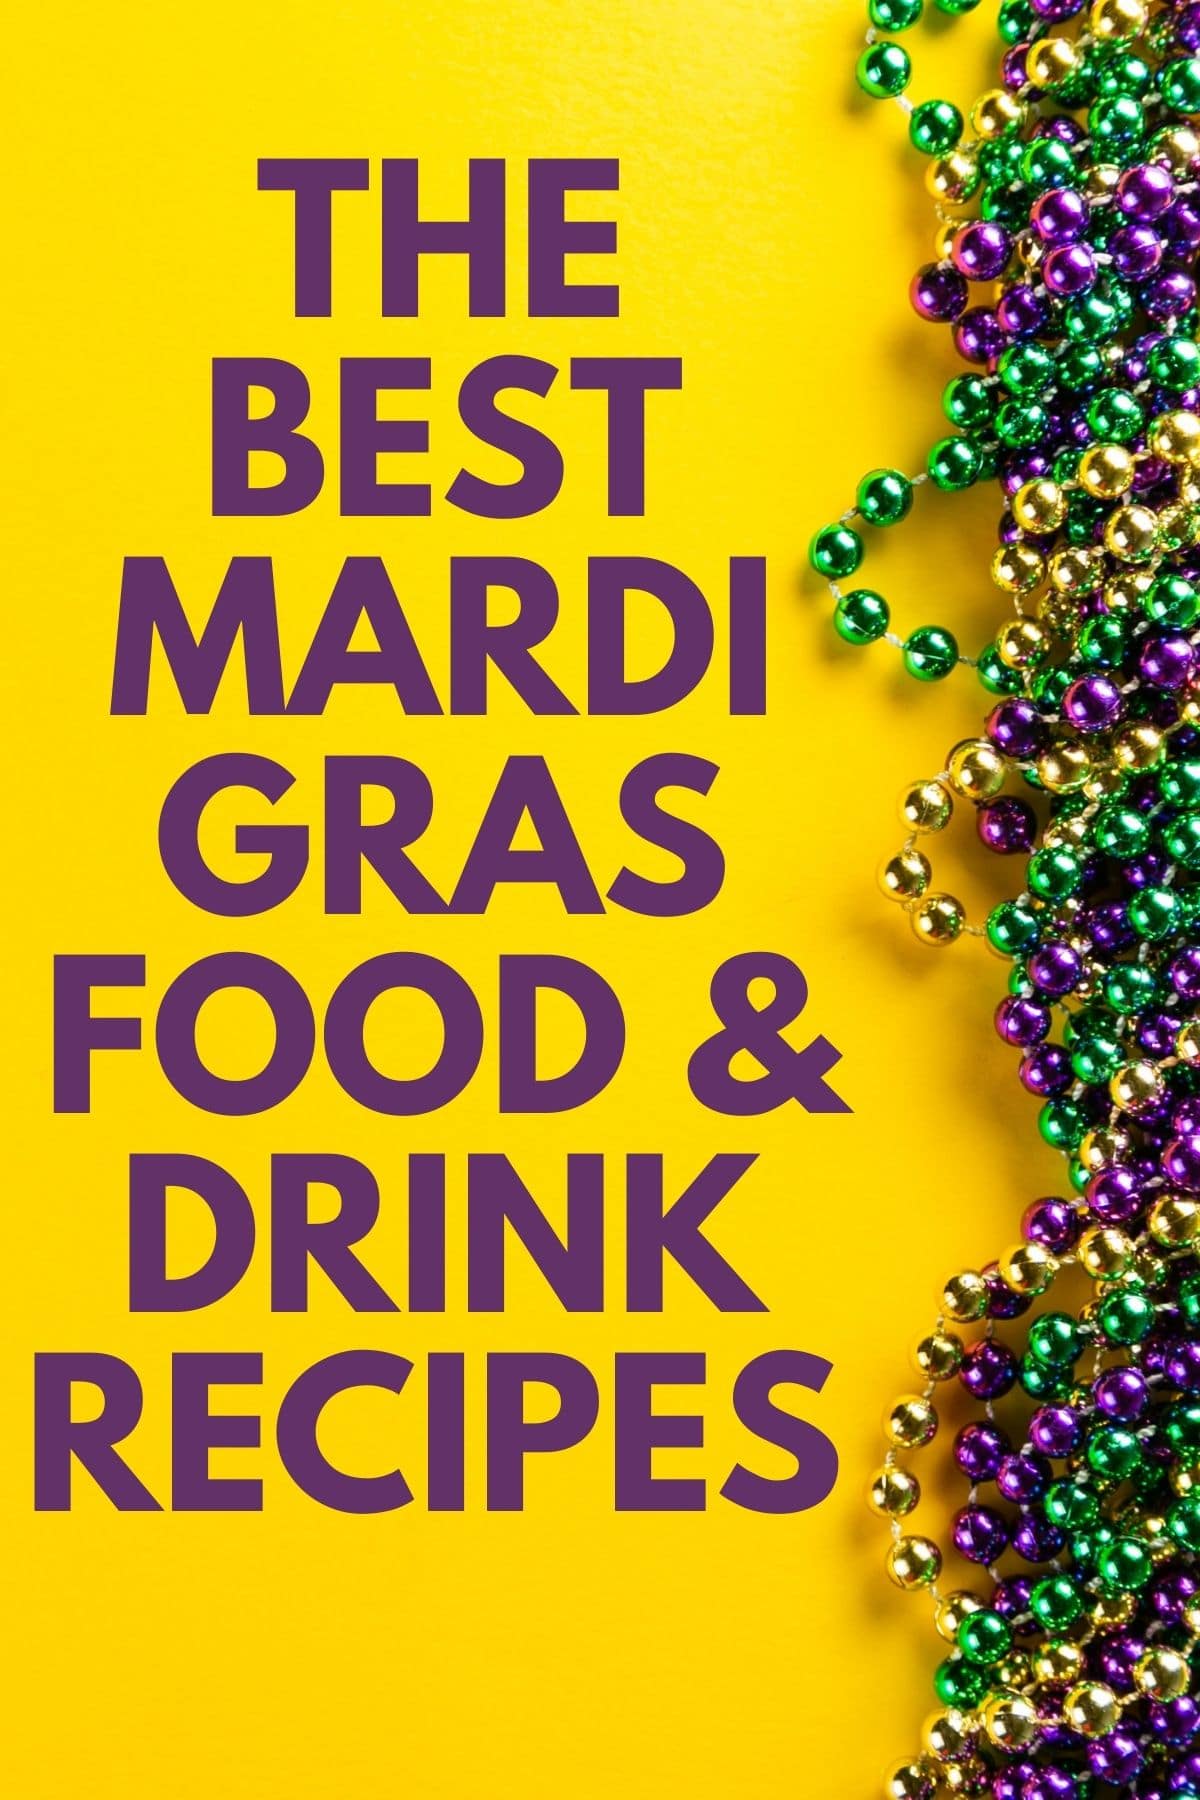 The best mardi gras food and drink recipes.